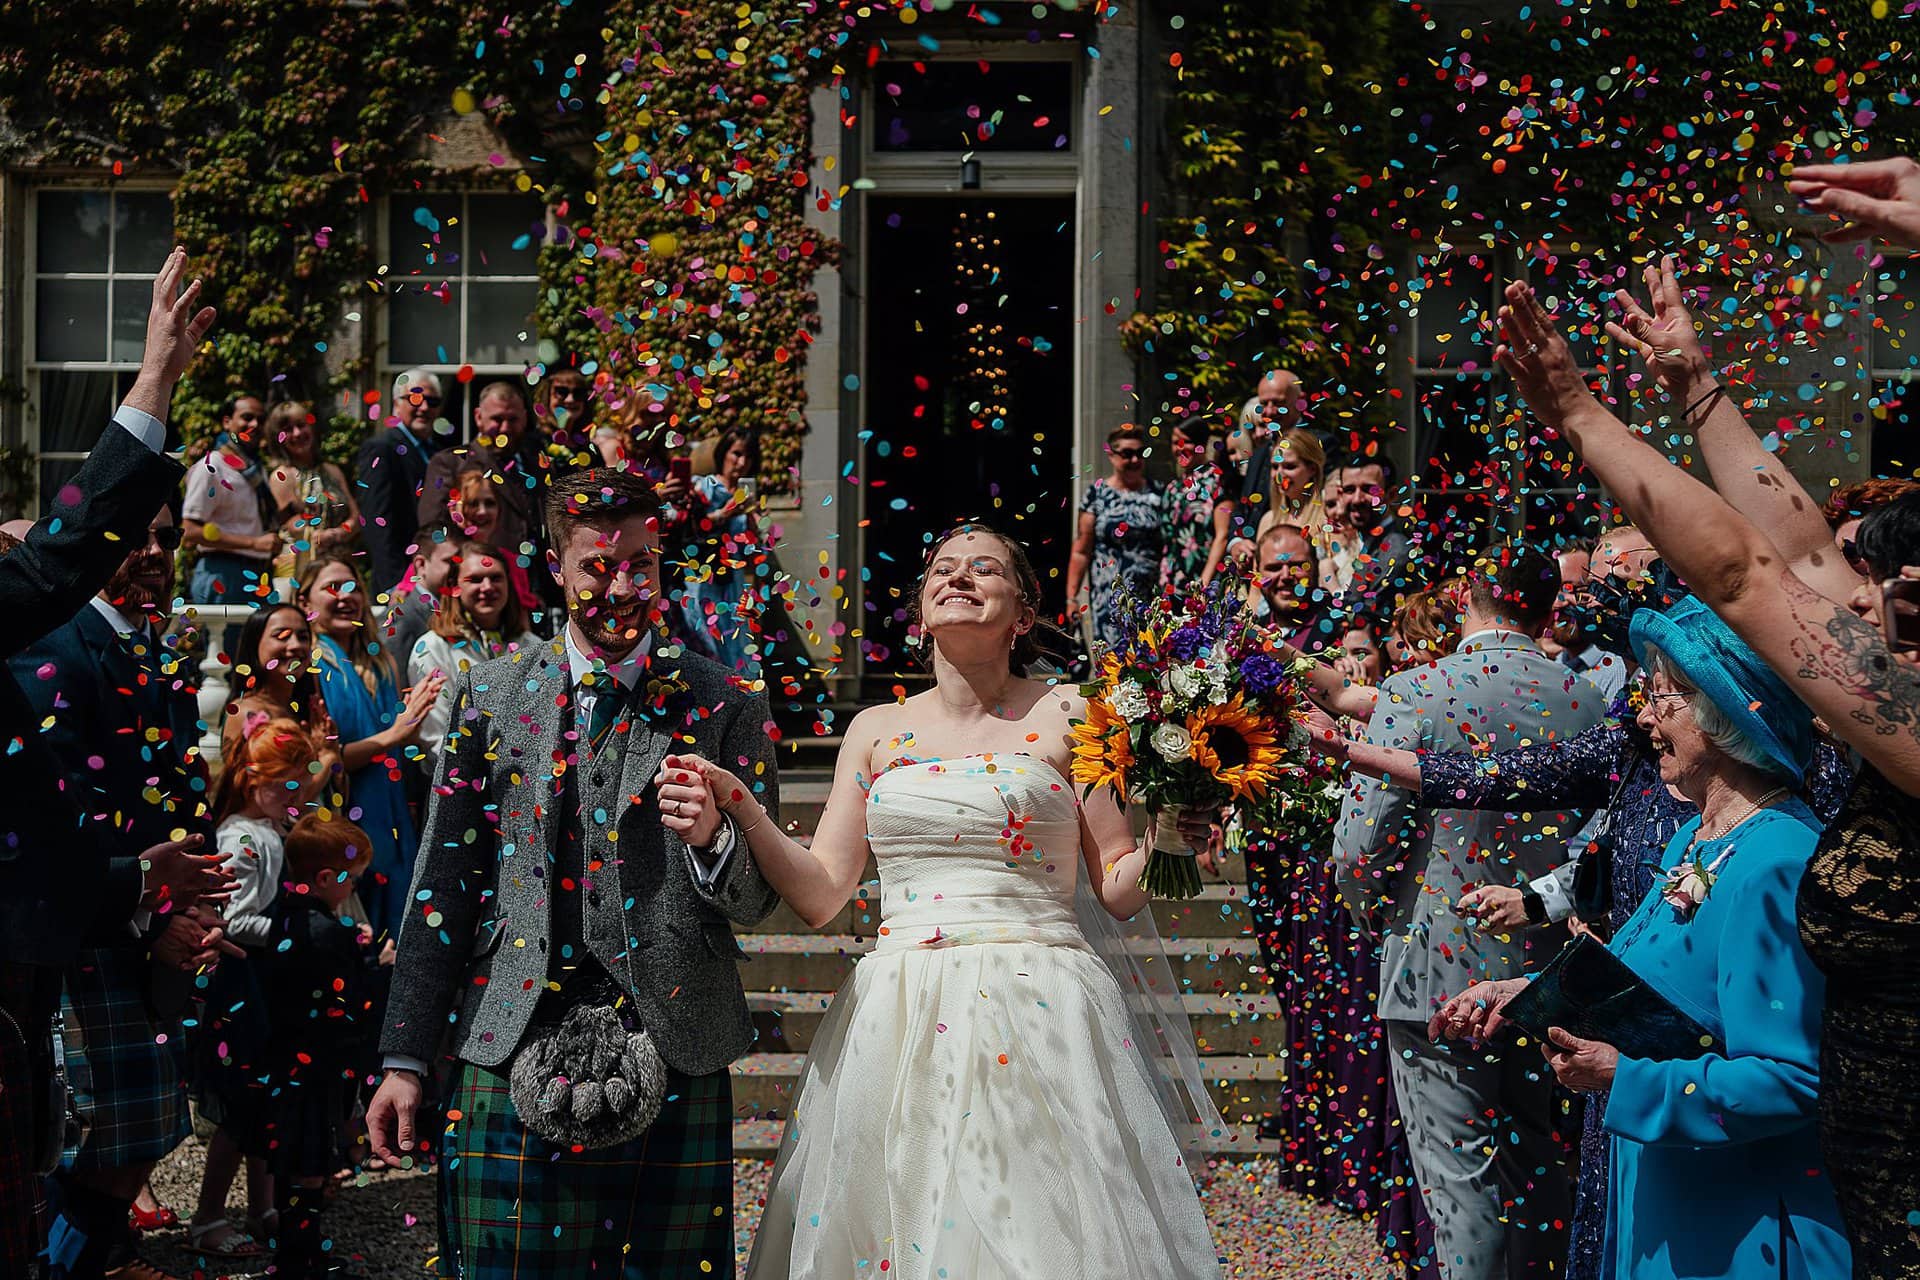 bride and groom holding hand and smiling as they walk through guests throwing confetti carlowrie castle wedding edinburgh colourful wedding photography scotland